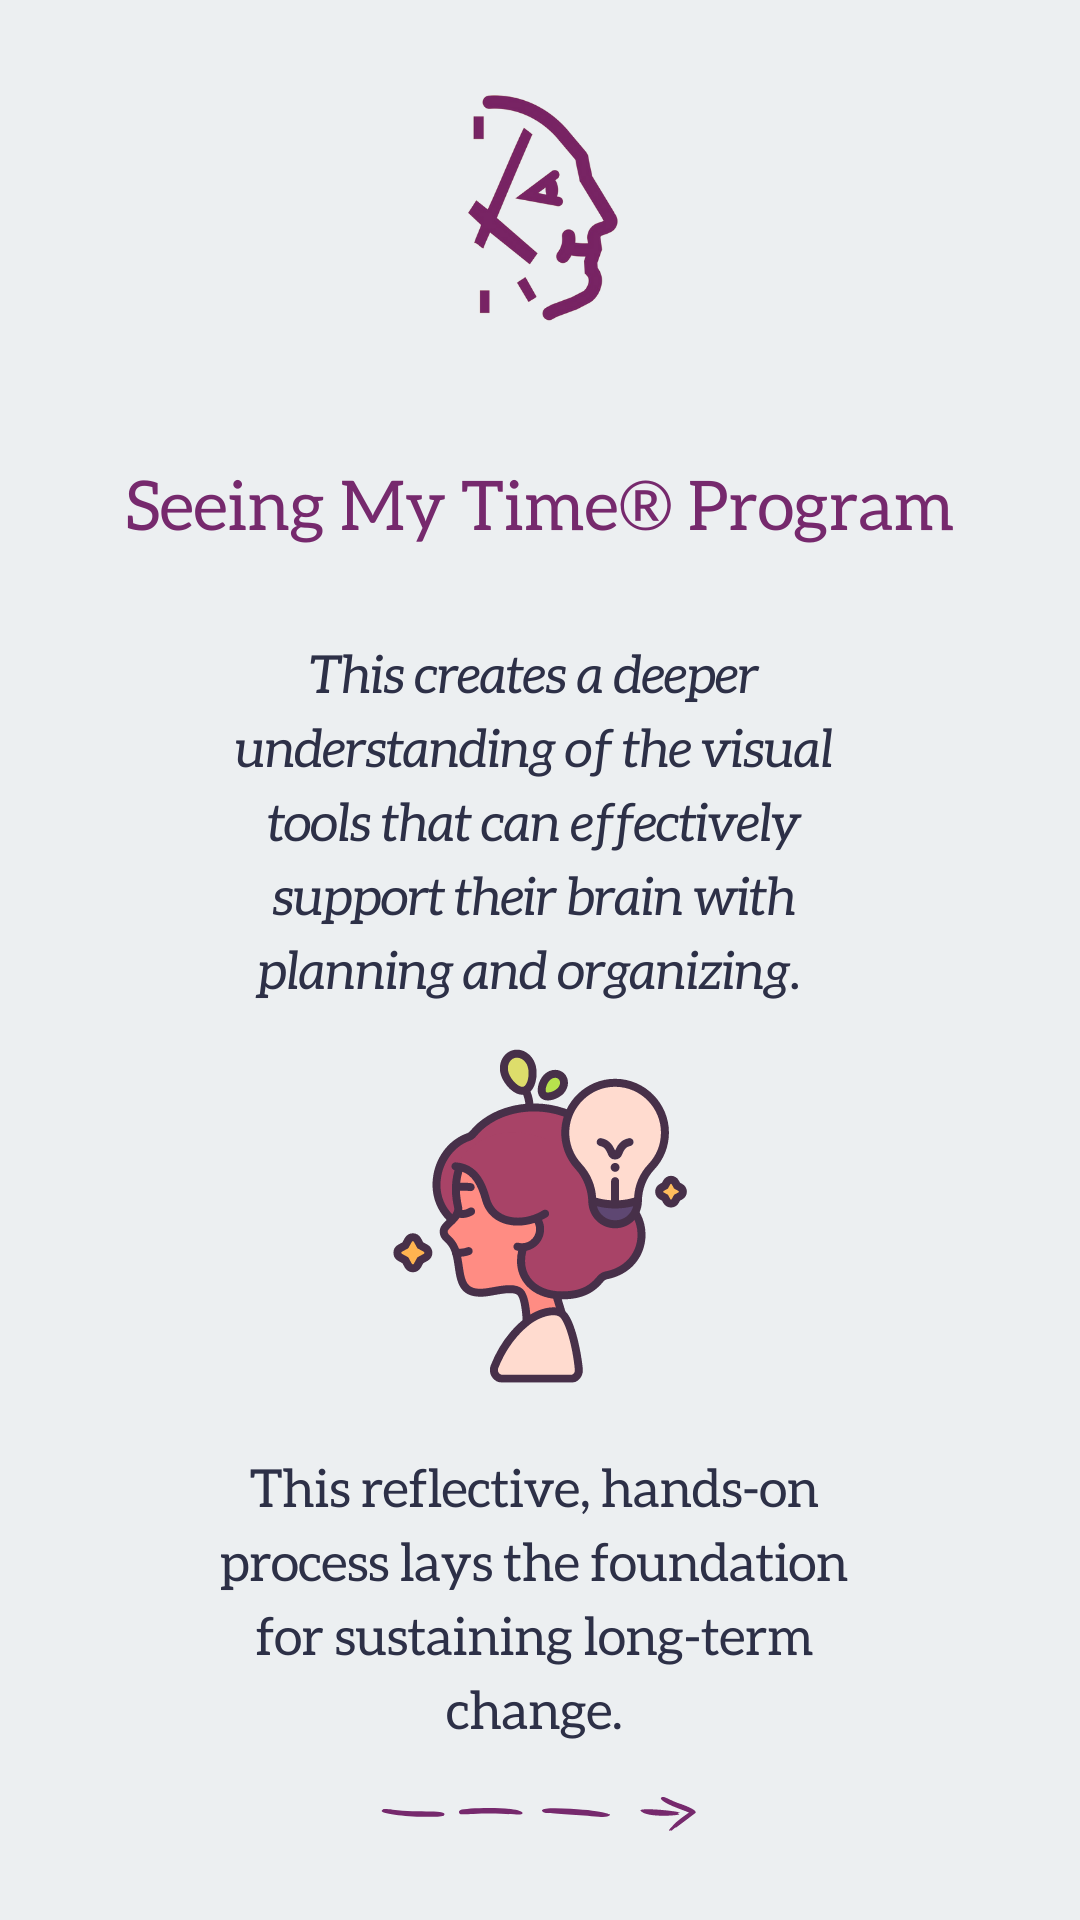 Instagram Story Highlights for marketing professional organizer The Seeing My Time Program by Executive Functioning Success 